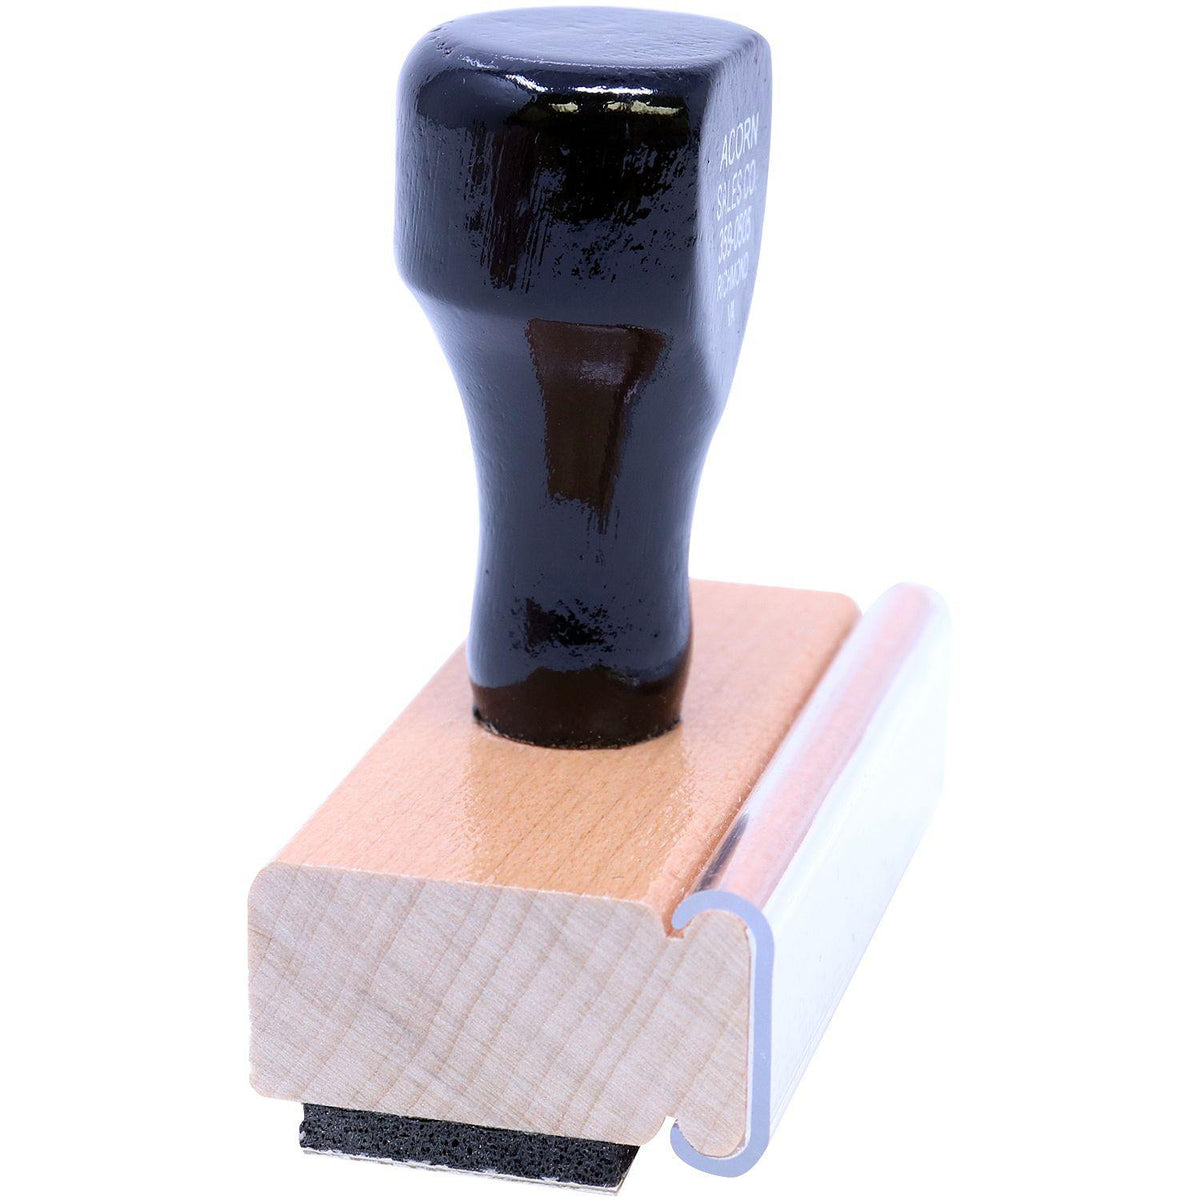 Side View of Large Benefits Assigned Rubber Stamp at an Angle